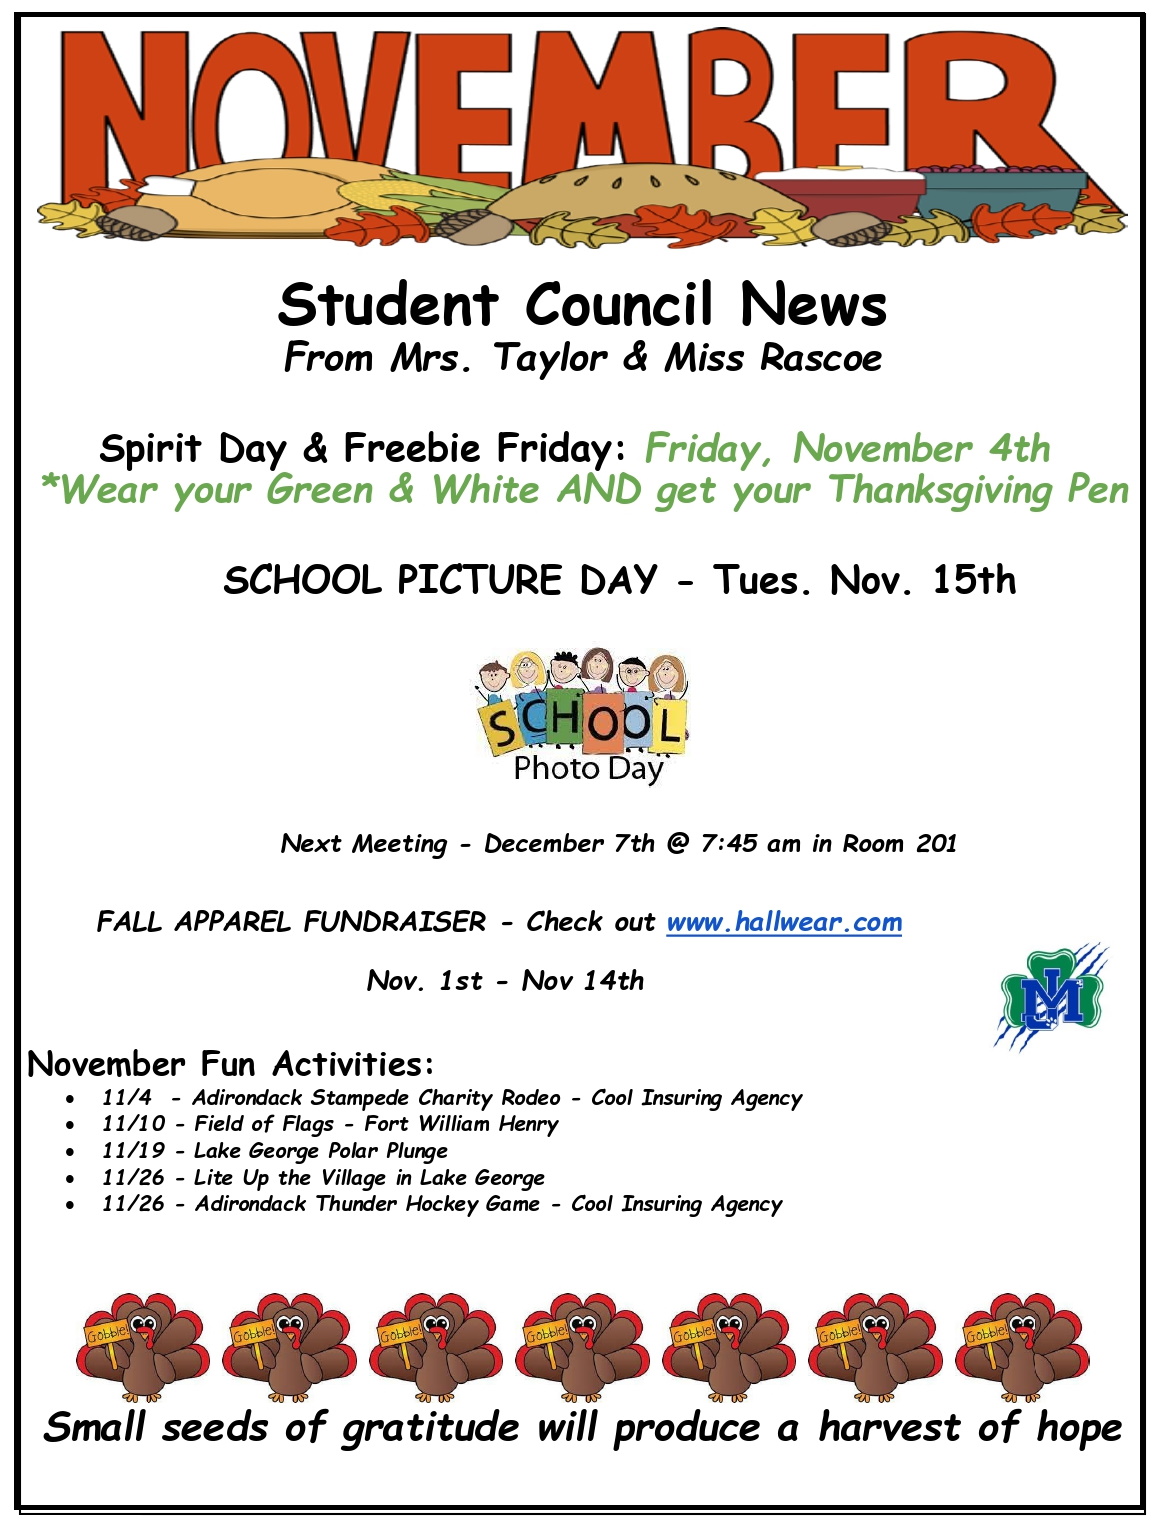 Minerva Central School Student Council News Image